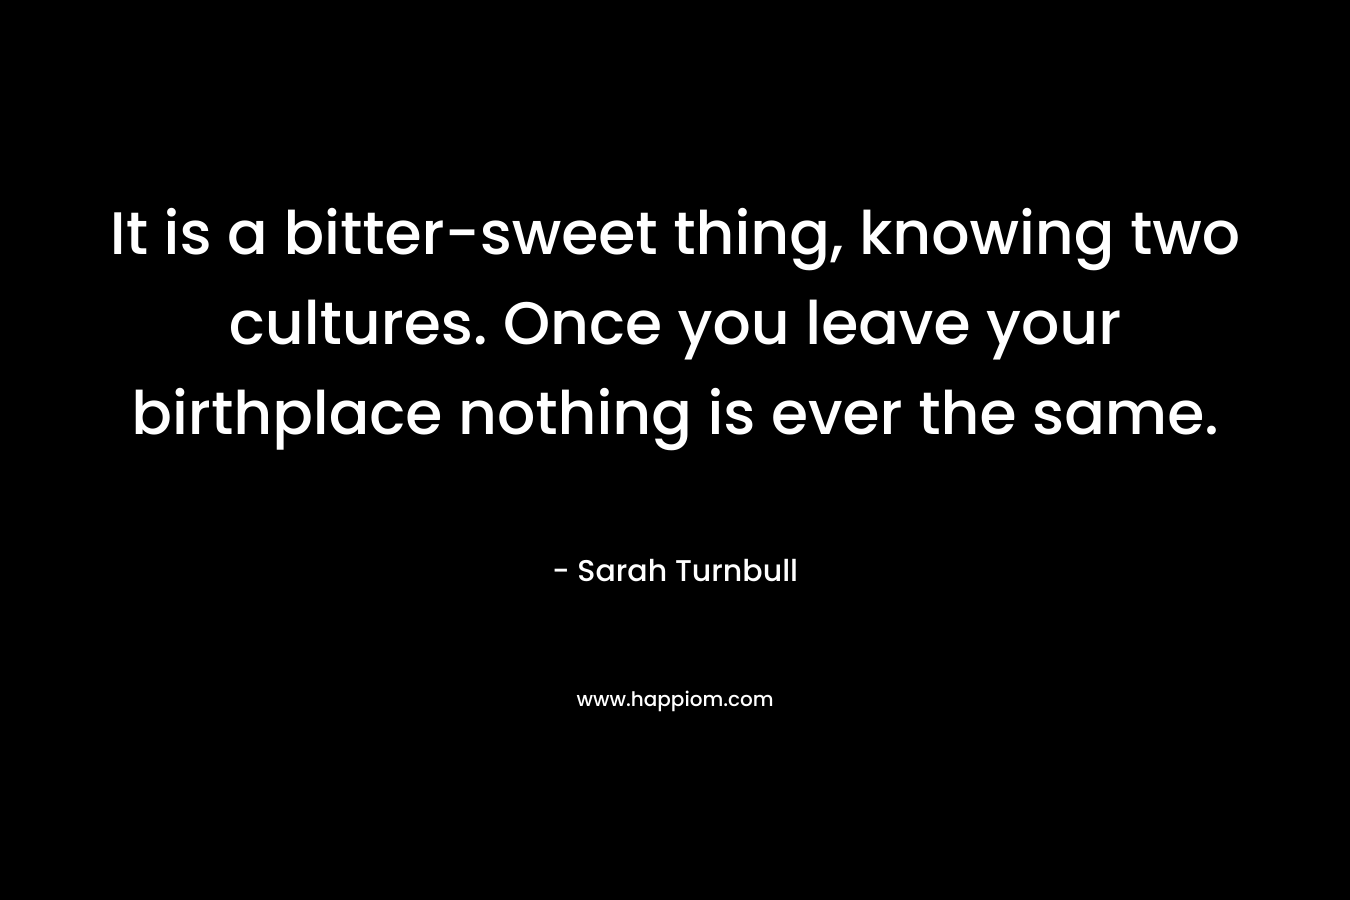 It is a bitter-sweet thing, knowing two cultures. Once you leave your birthplace nothing is ever the same. – Sarah Turnbull